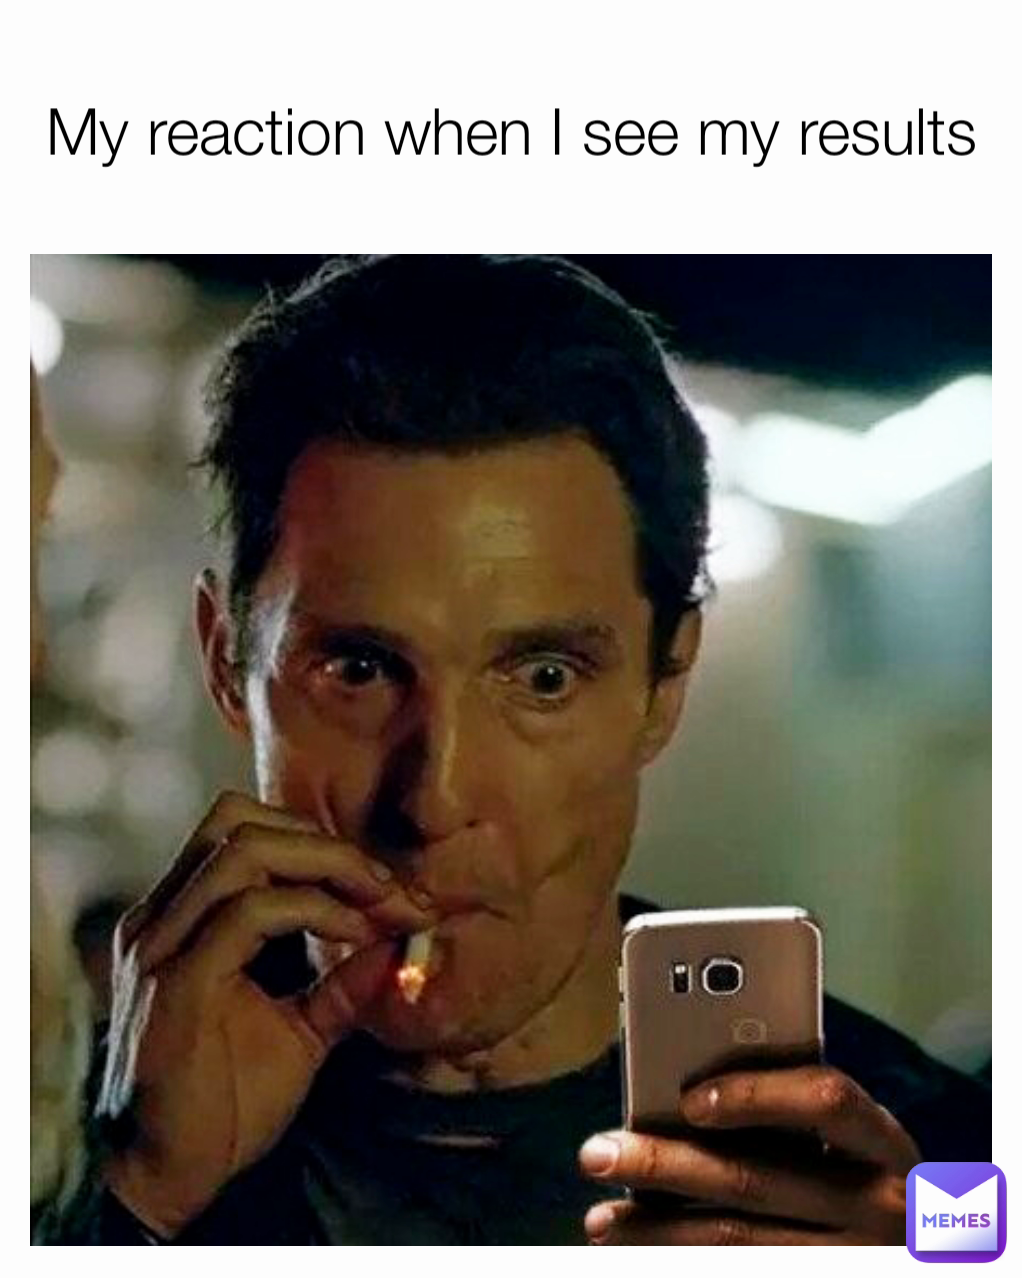 My reaction when I see my results